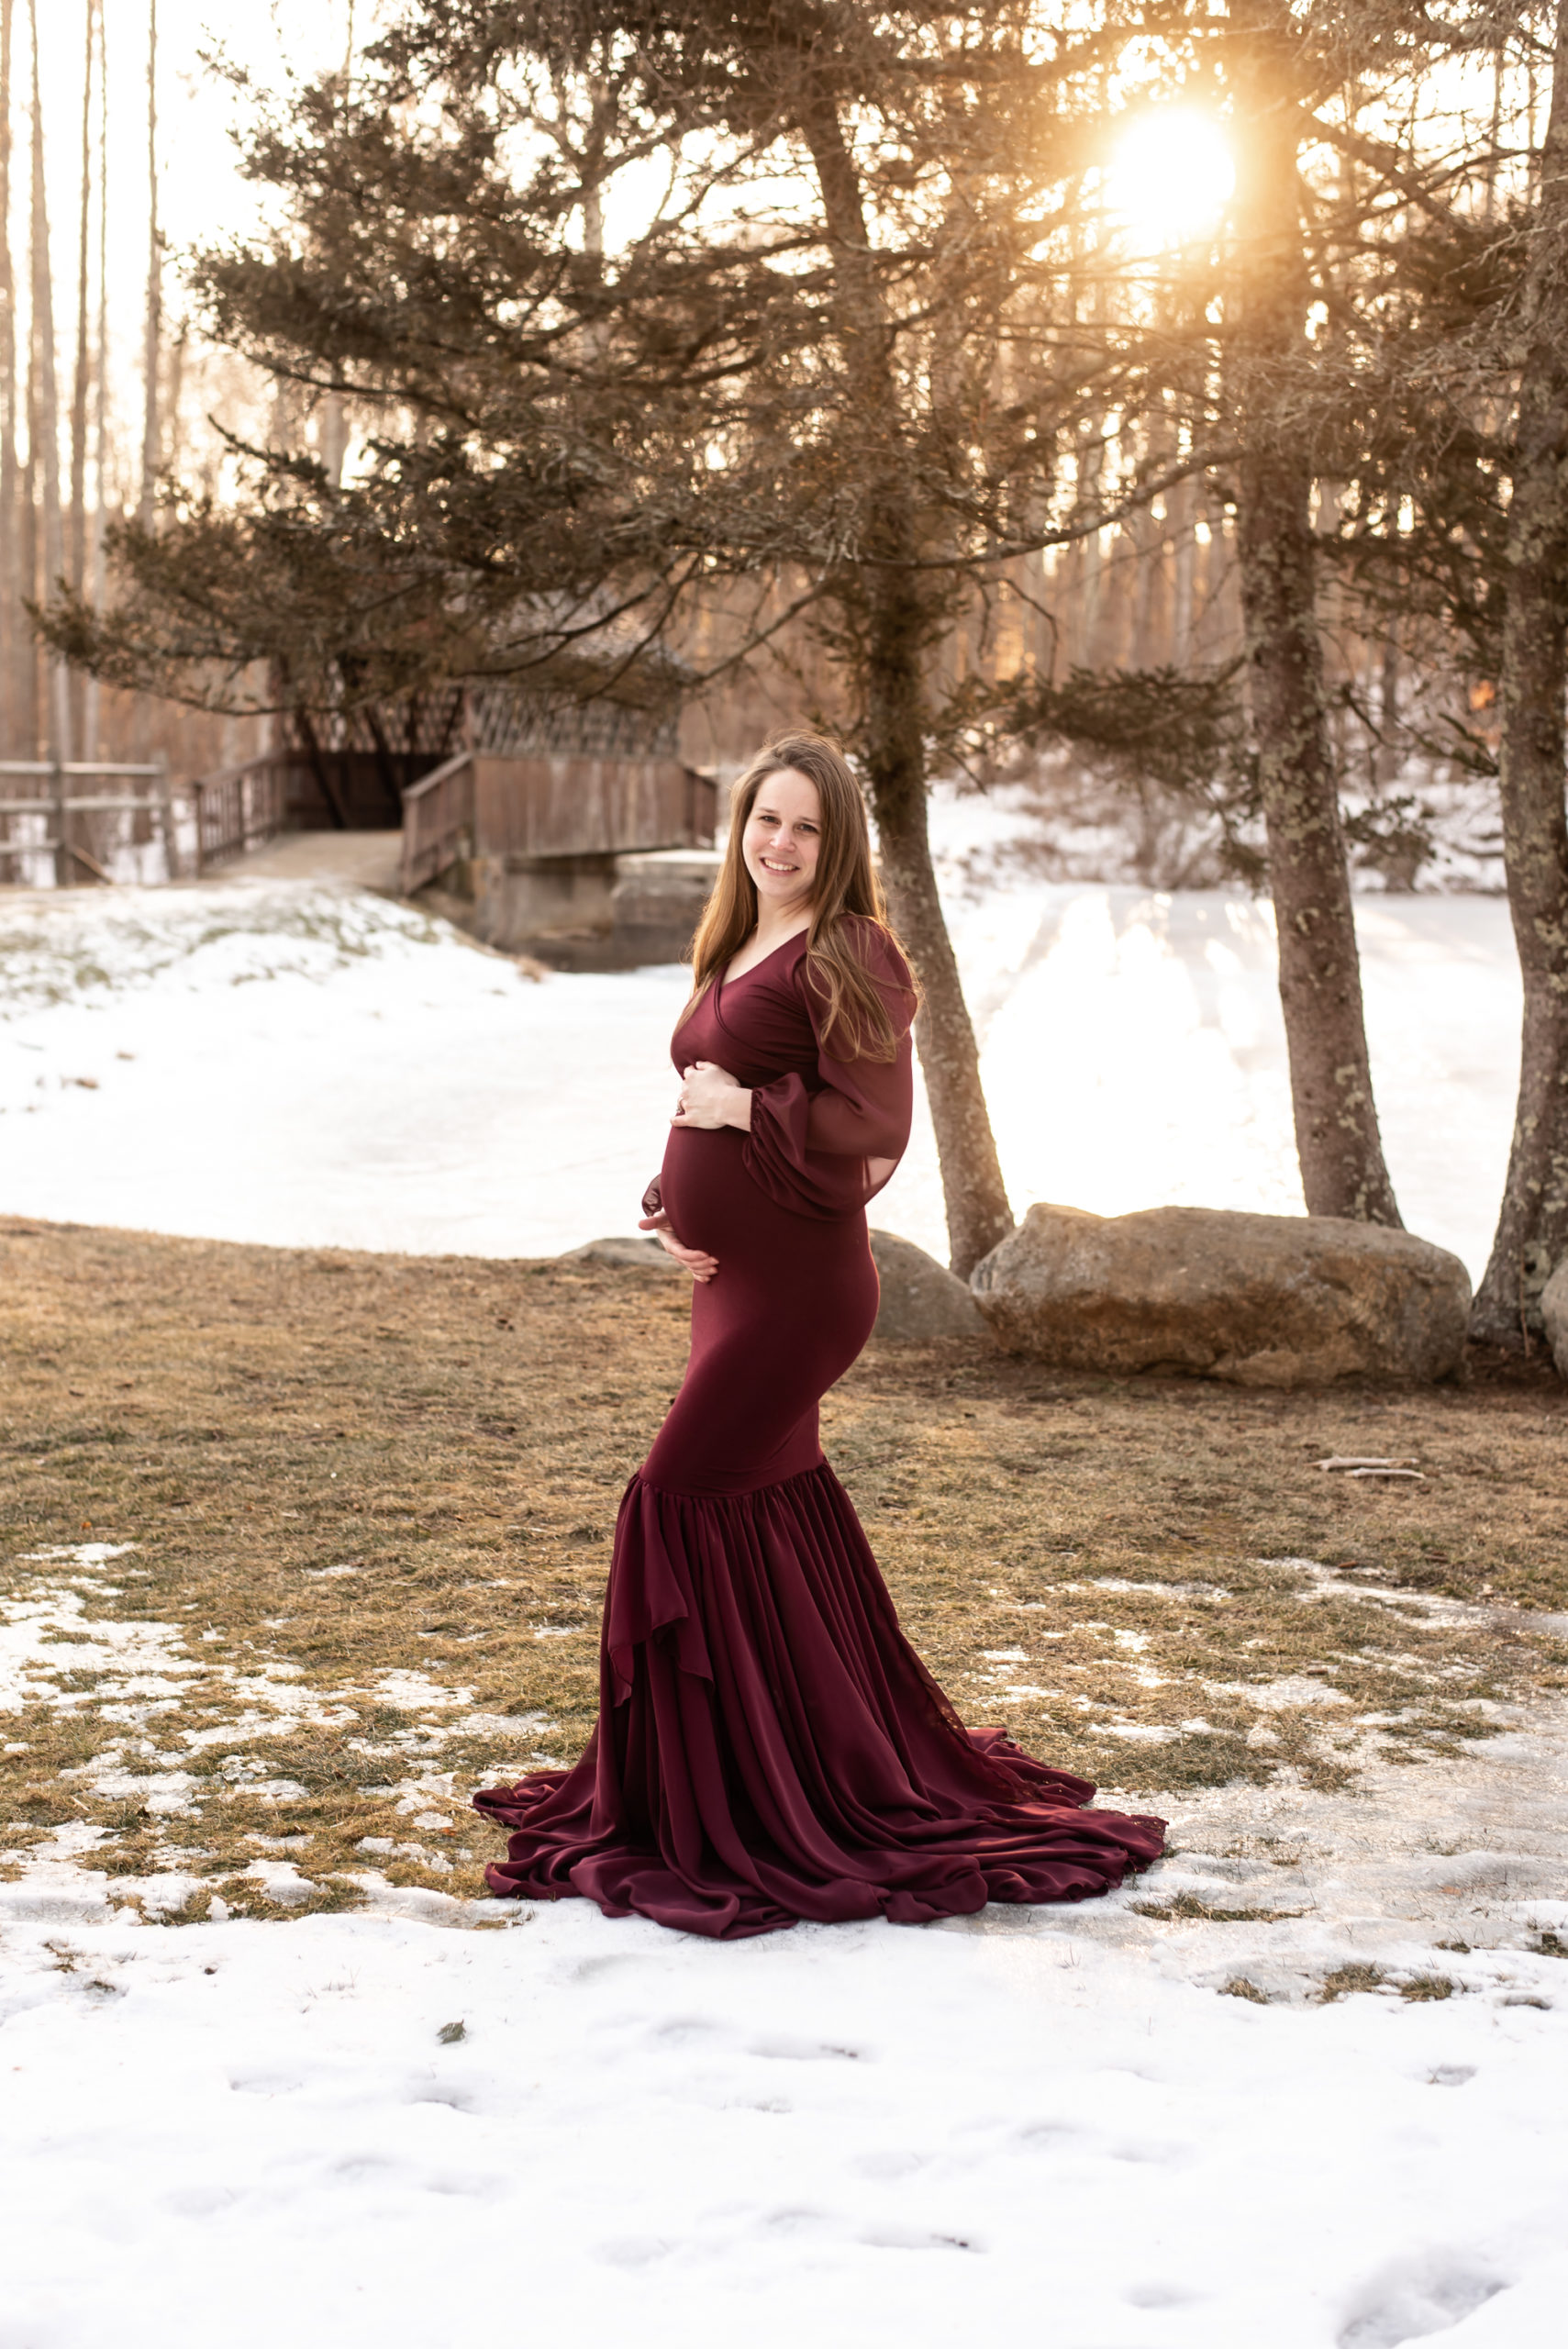 Snow Maternity Session in Avon, CT | Sharon Leger Photography